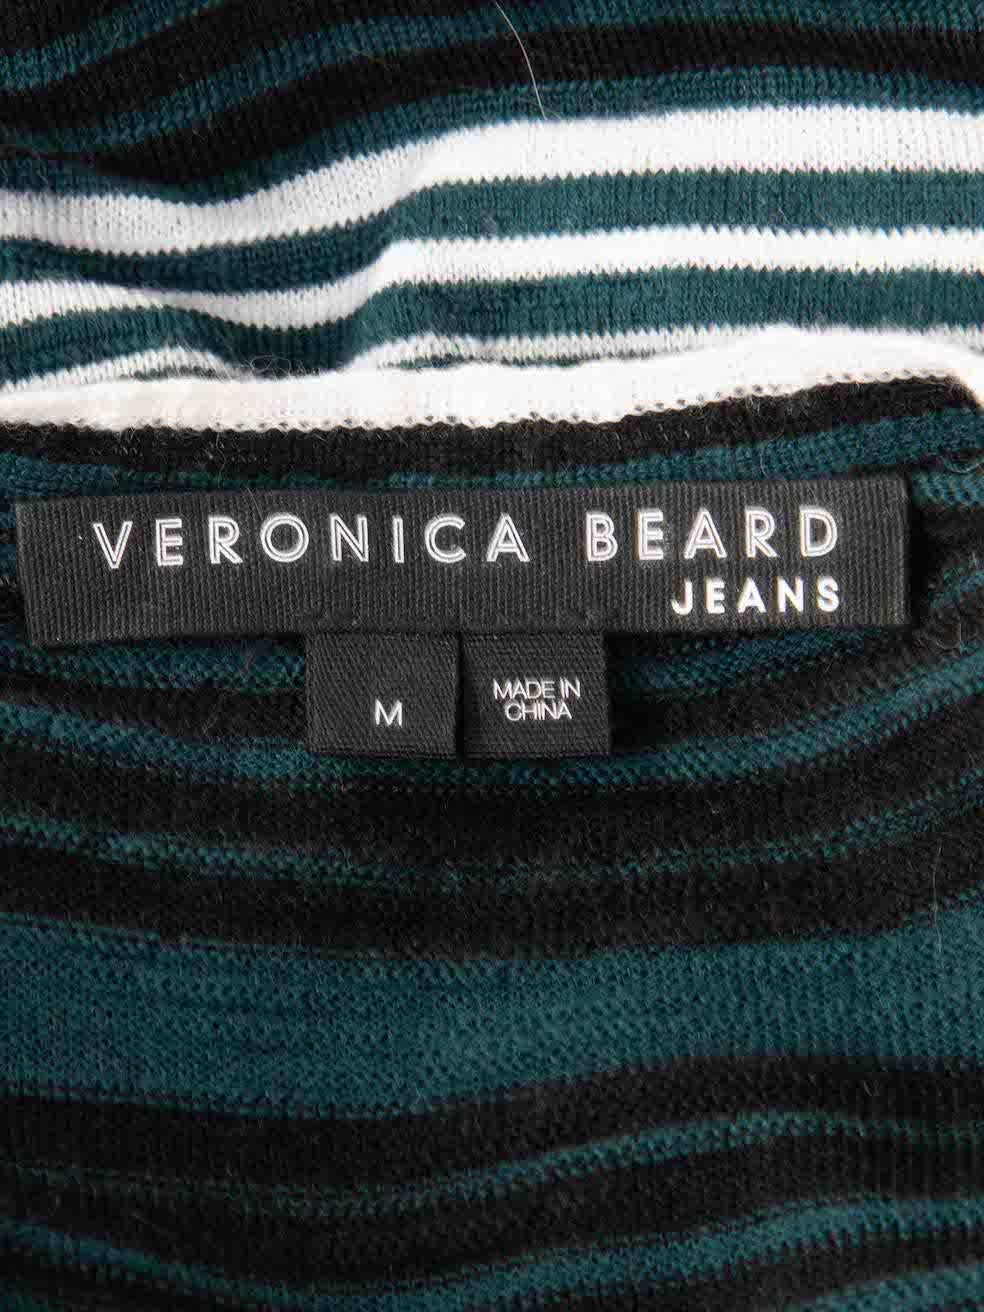 Veronica Beard Green Wool Striped Knitted Jumper Size M In Good Condition For Sale In London, GB